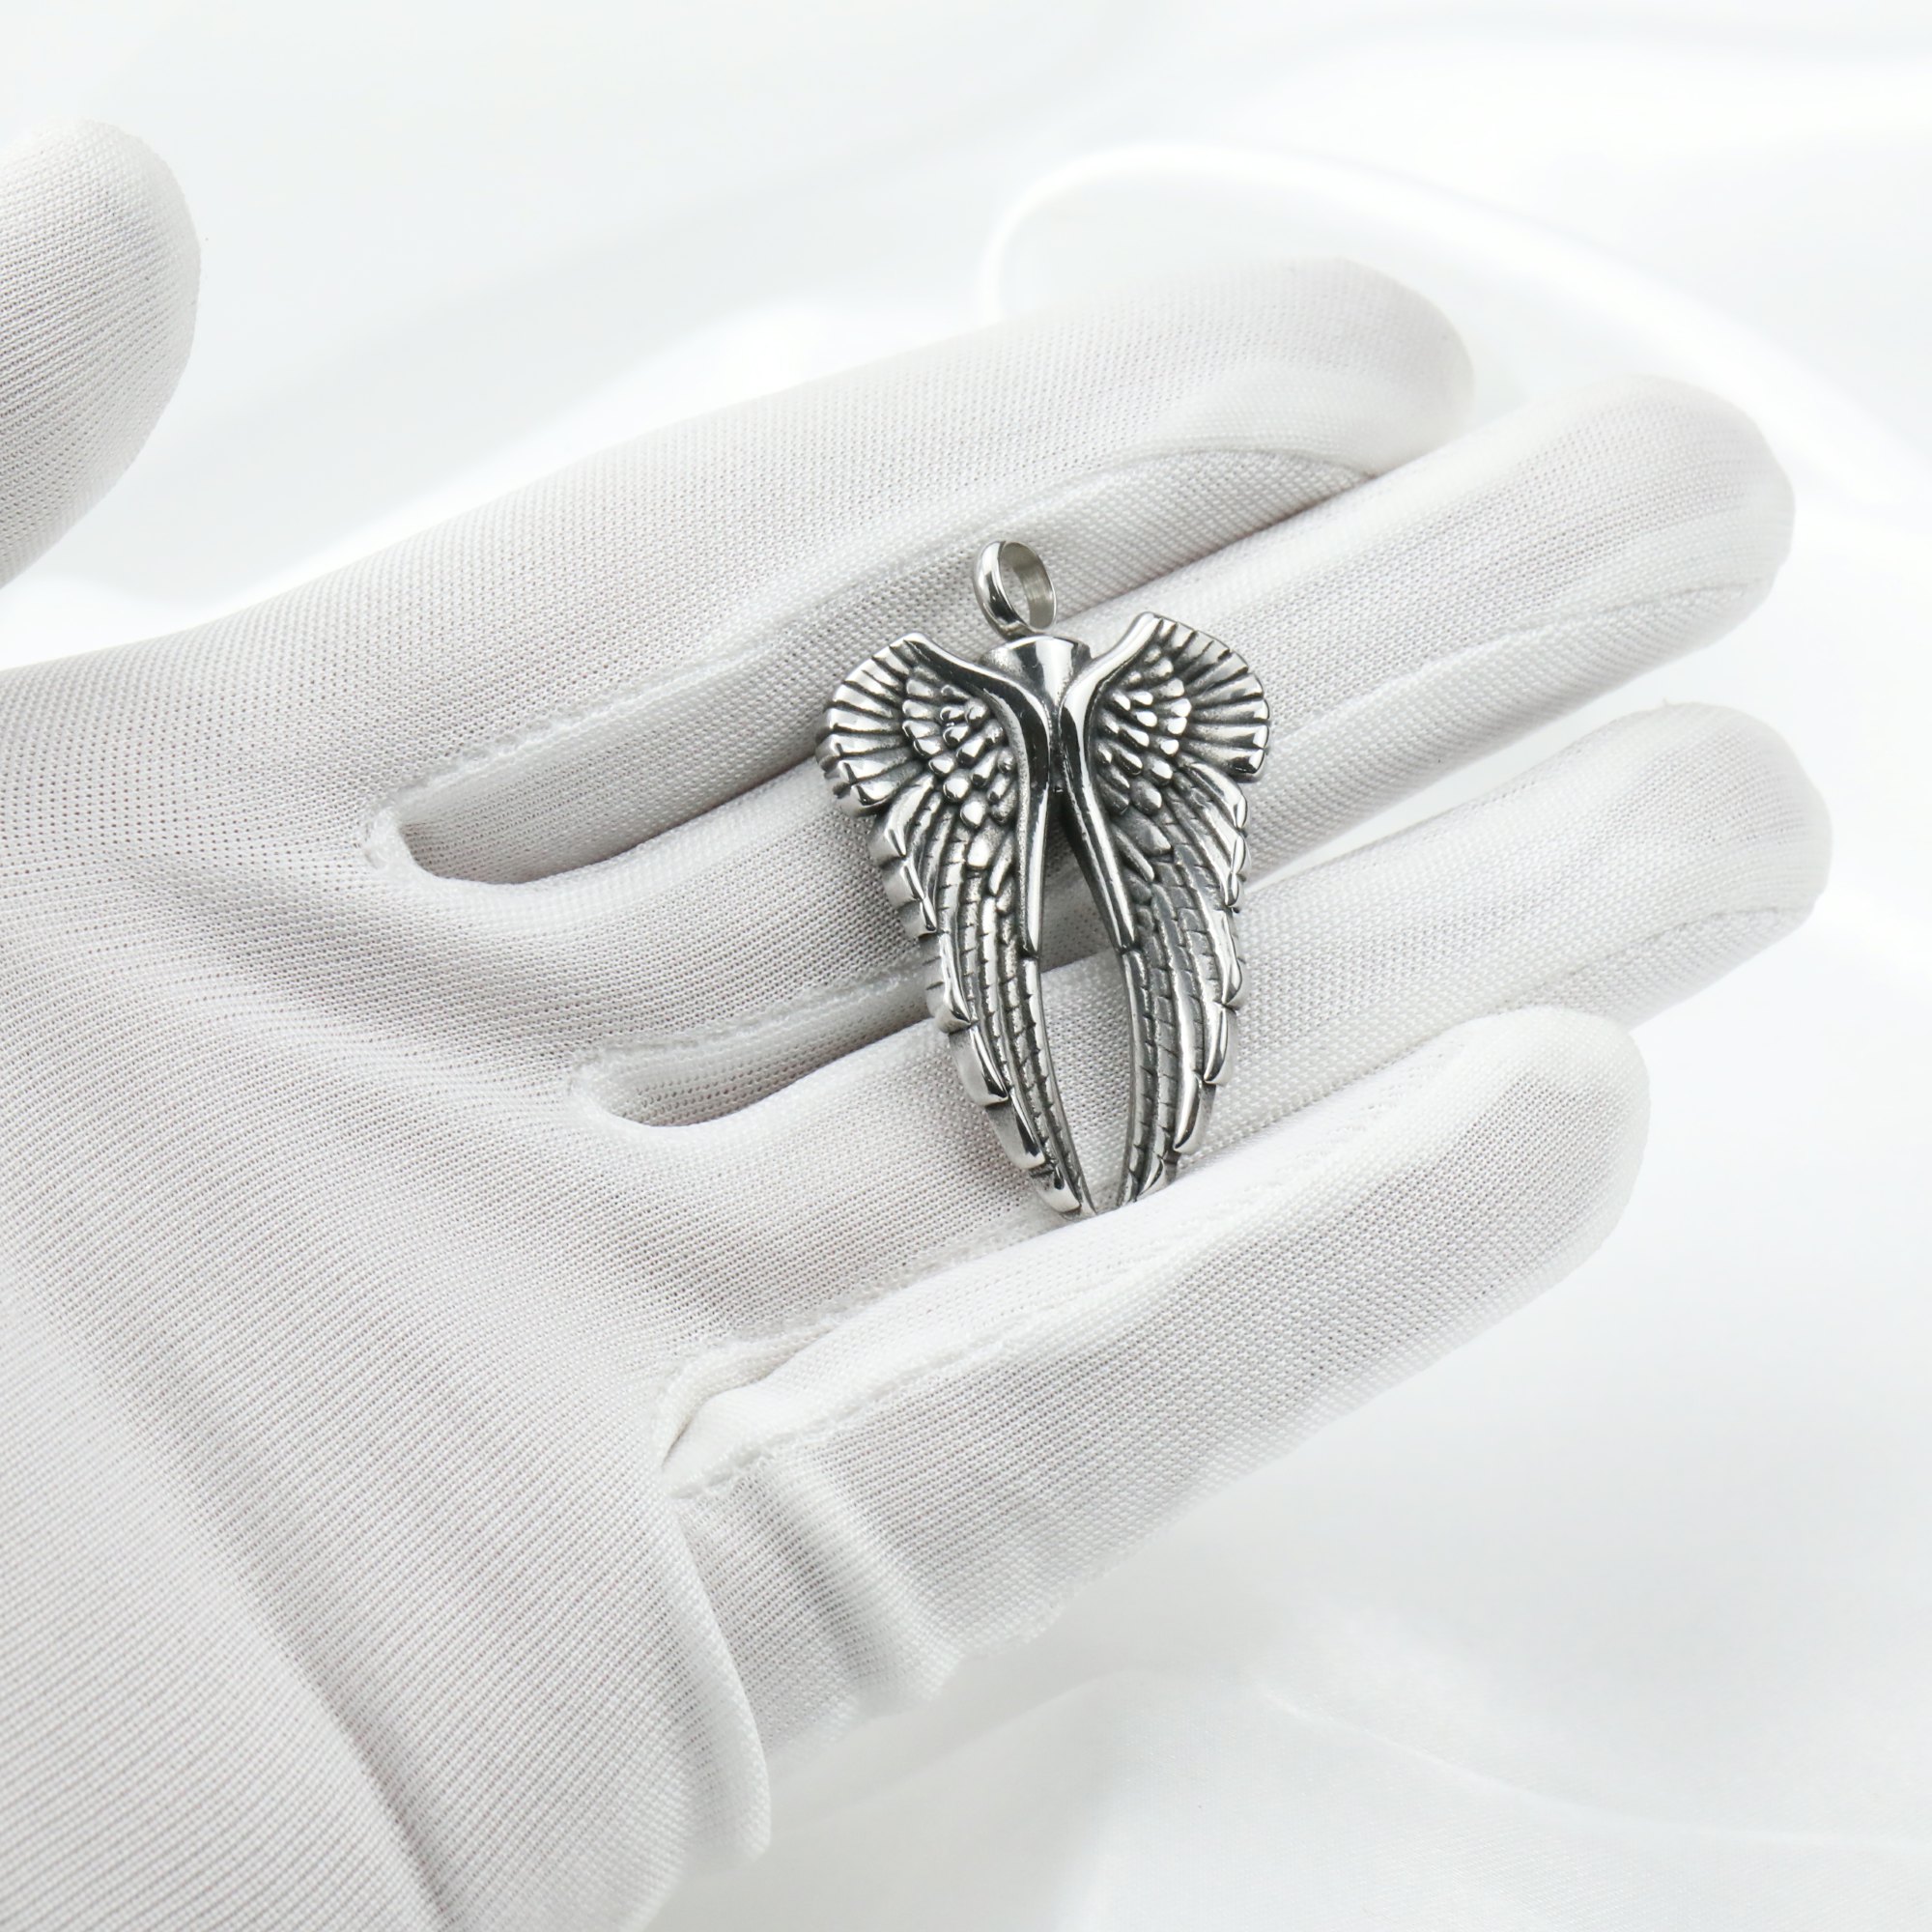 Keepsake Ash Canister Cremation Urn Set Antiqued Silver Angel Wings Stainless Steel Wish Vial Pendant Prayer Box 27x40MM 1190051 - Click Image to Close